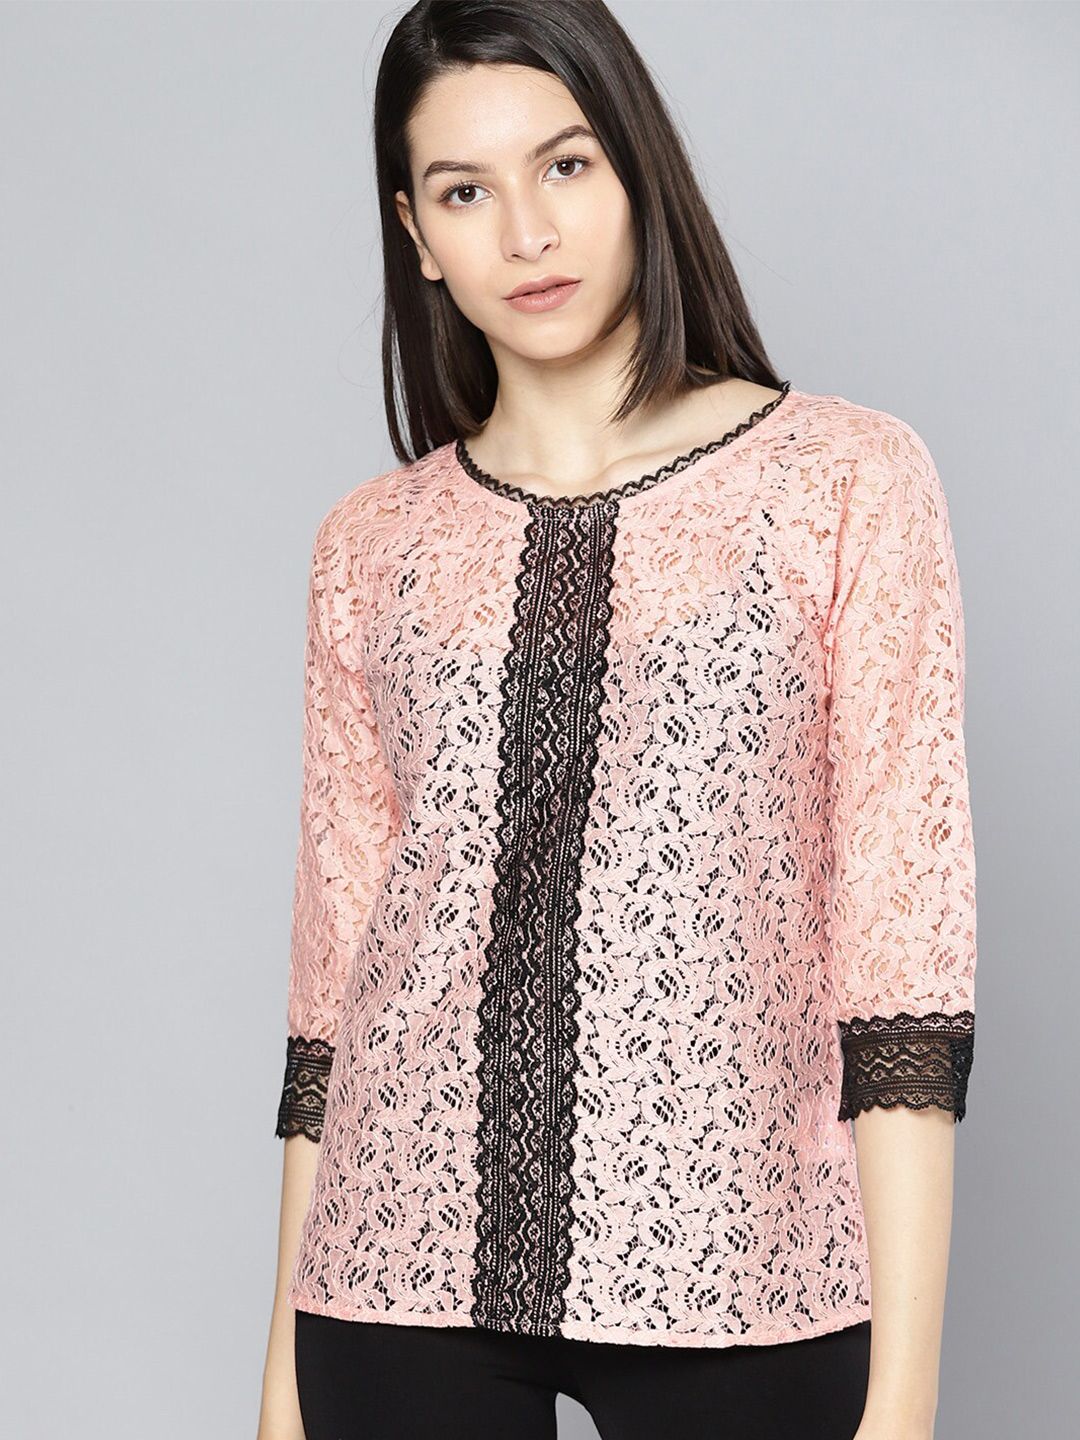 Mast & Harbour Floral Lace Top With Lace Insert Price in India